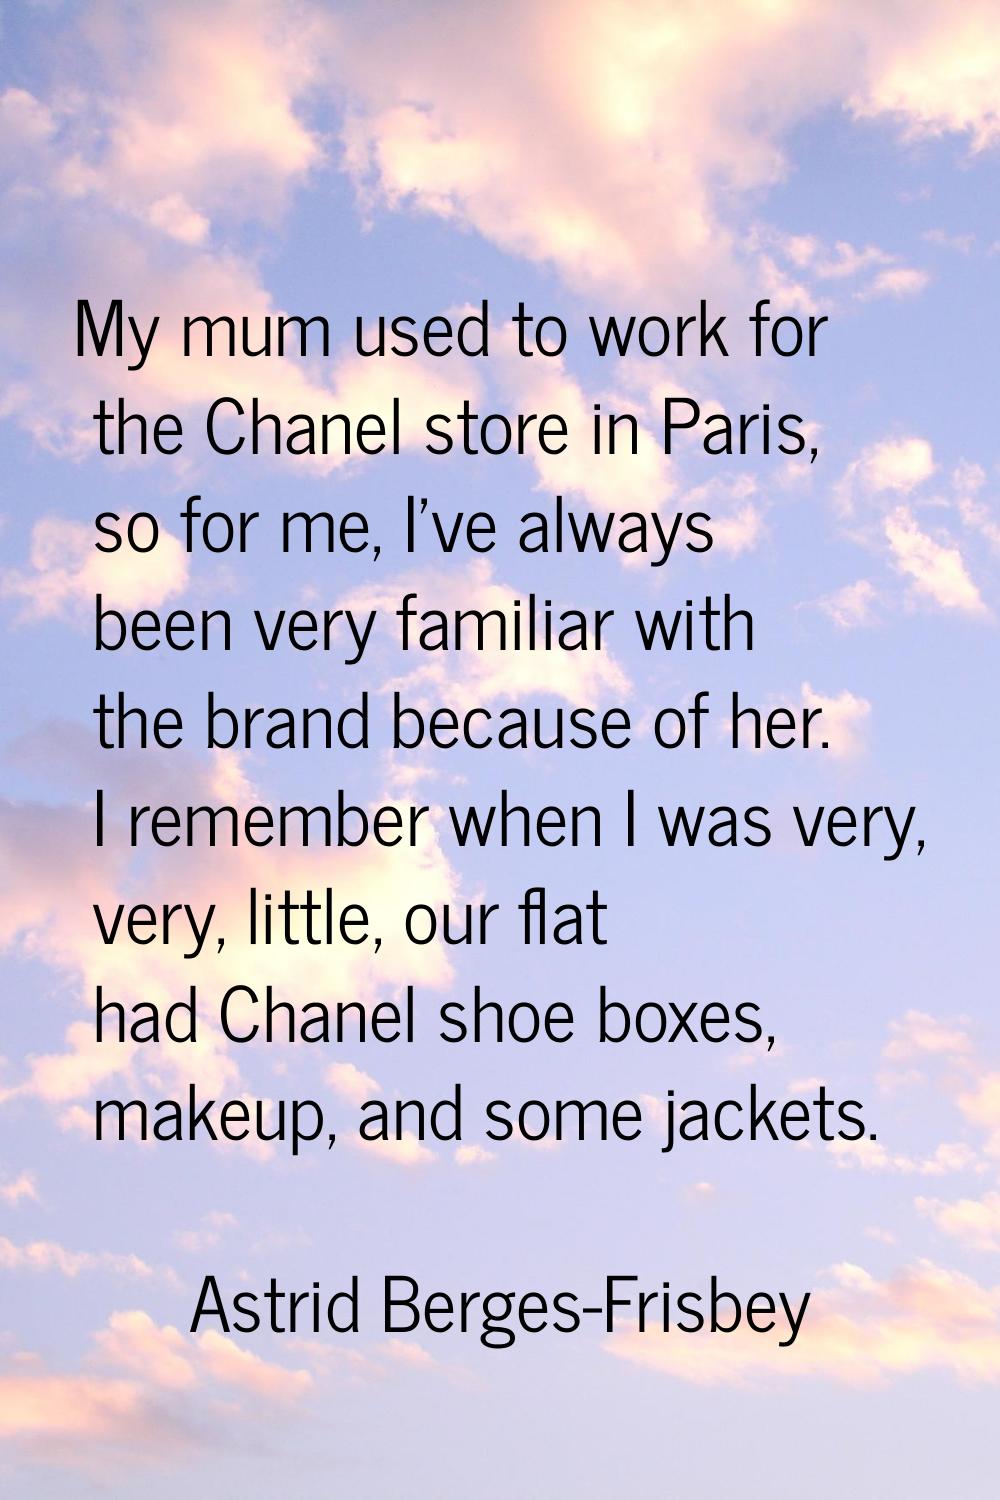 My mum used to work for the Chanel store in Paris, so for me, I've always been very familiar with t